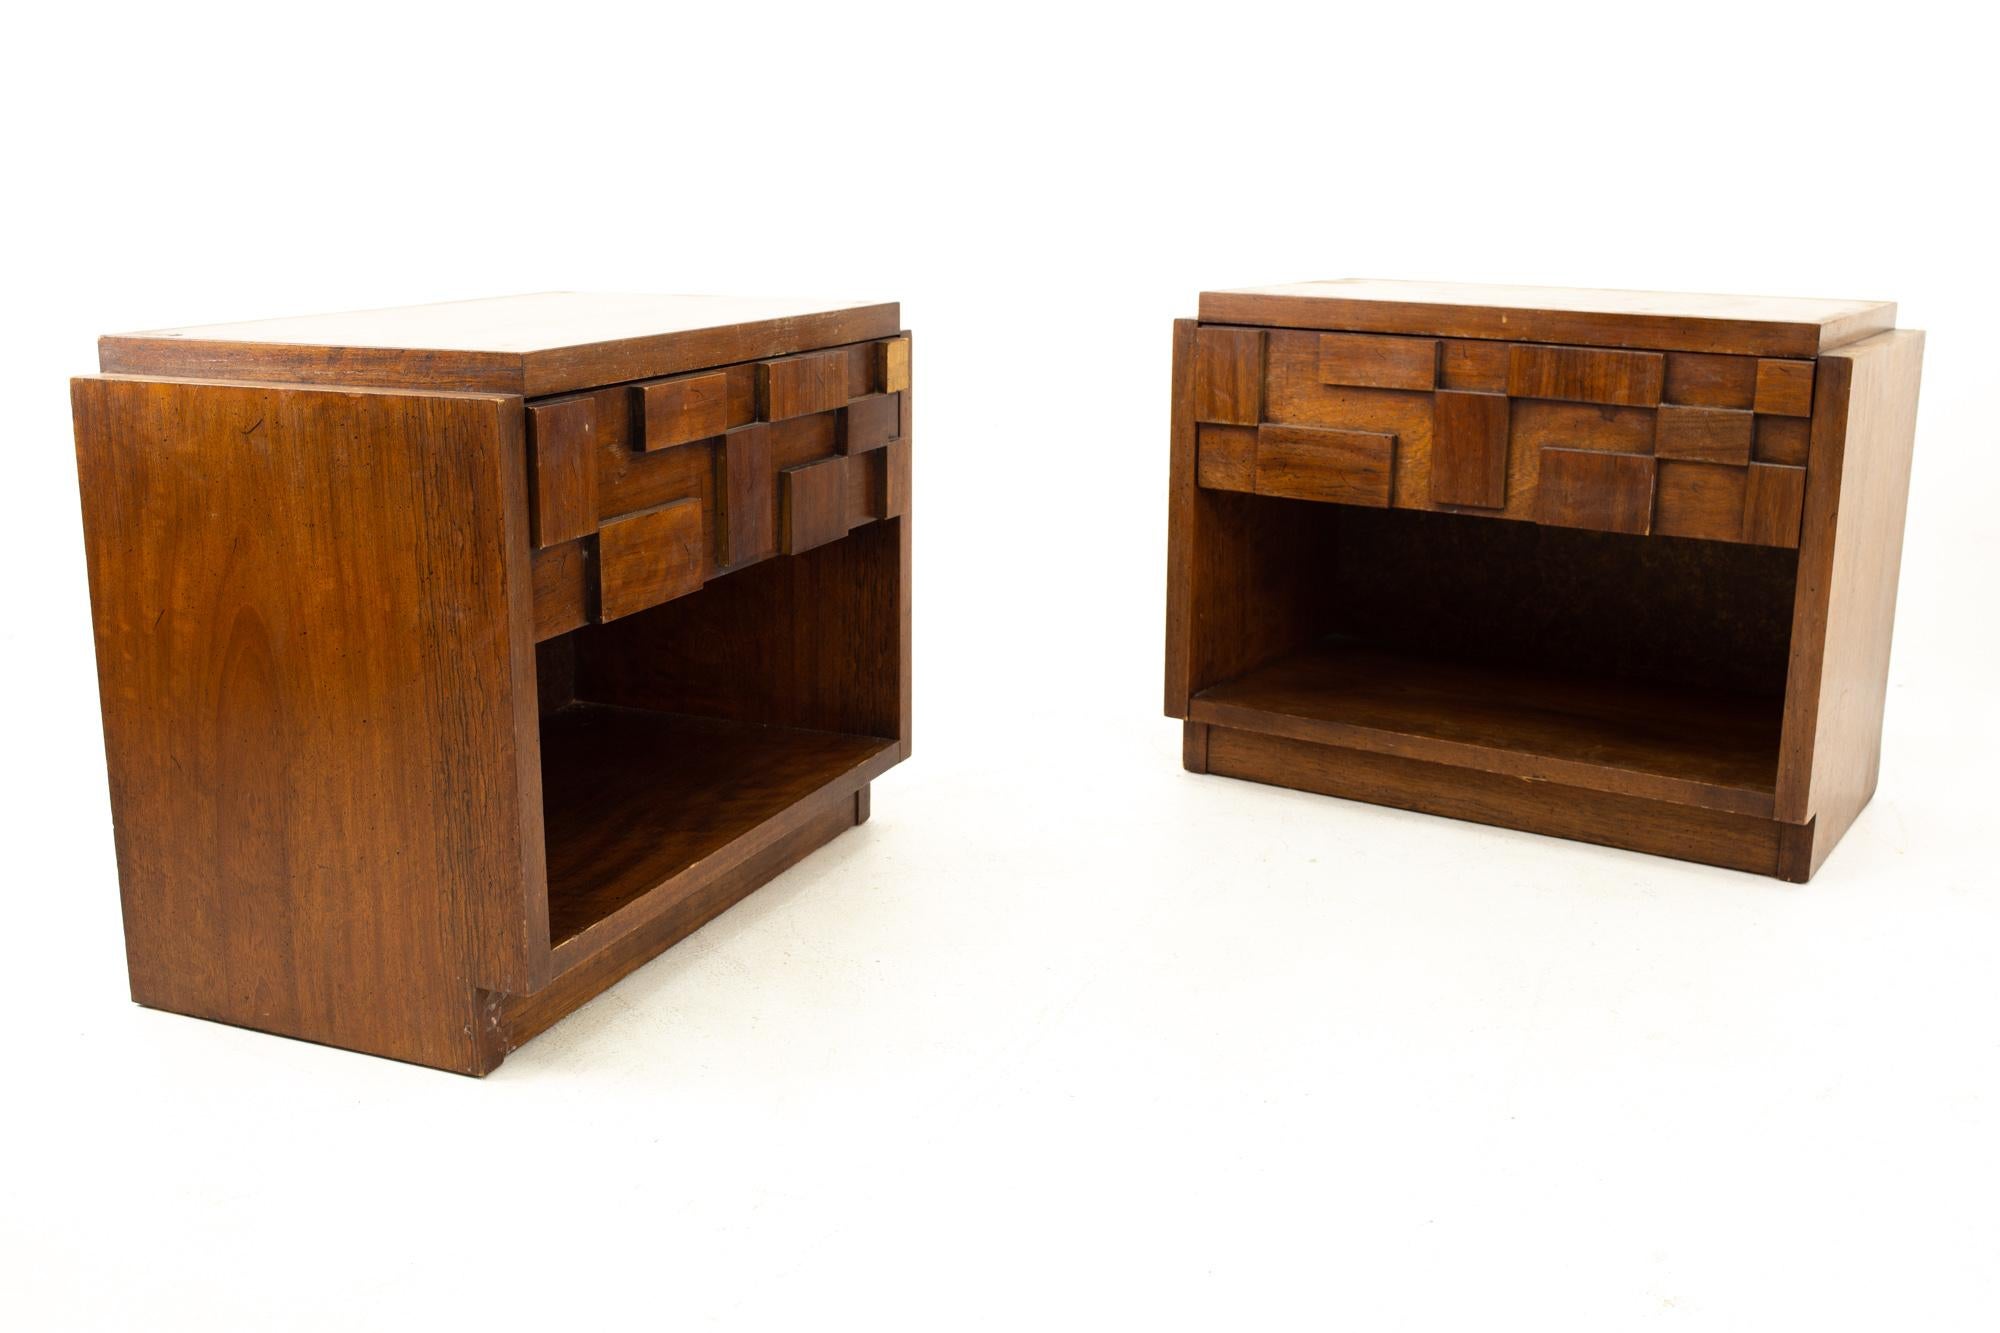 Paul Evans Style Lane Brutalist mid century single drawer nightstands - Pair

Each nightstand measures: 28 wide x 16.5 deep x 22.5 inches high

All pieces of furniture can be had in what we call restored vintage condition. That means the piece